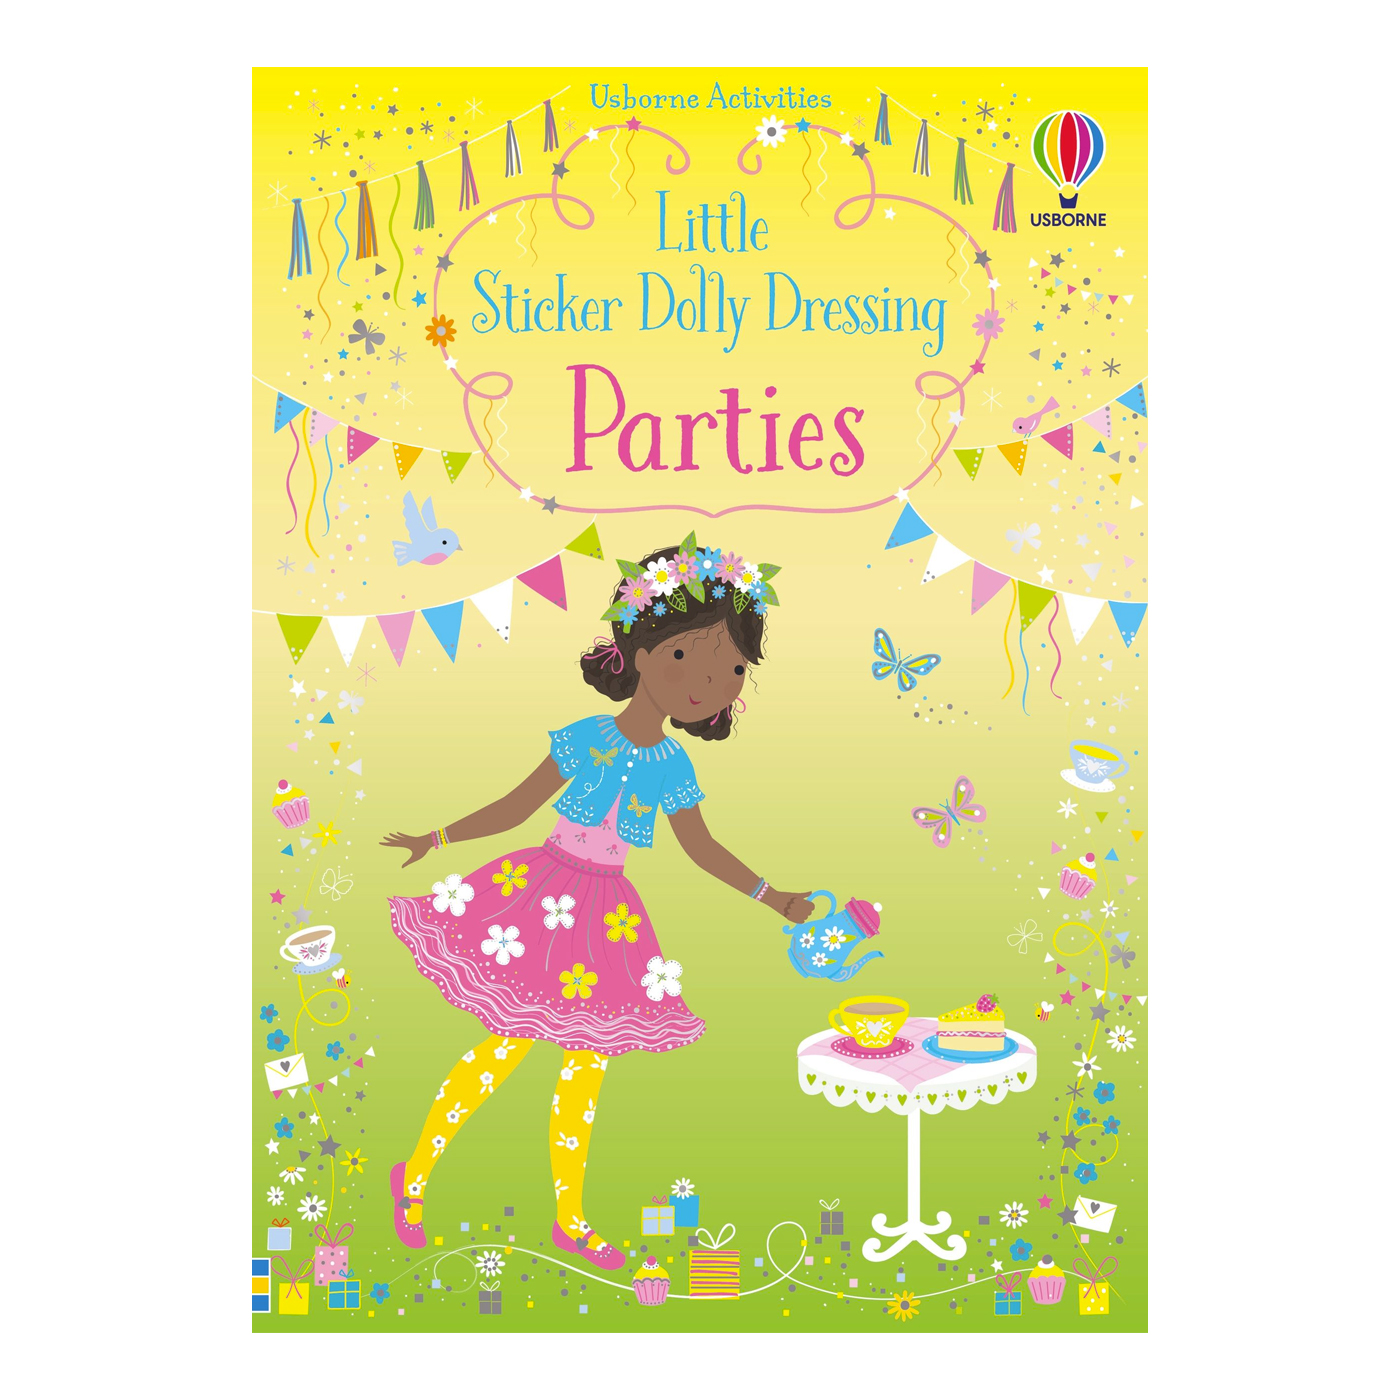  Little Sticker Dolly Dressing Parties